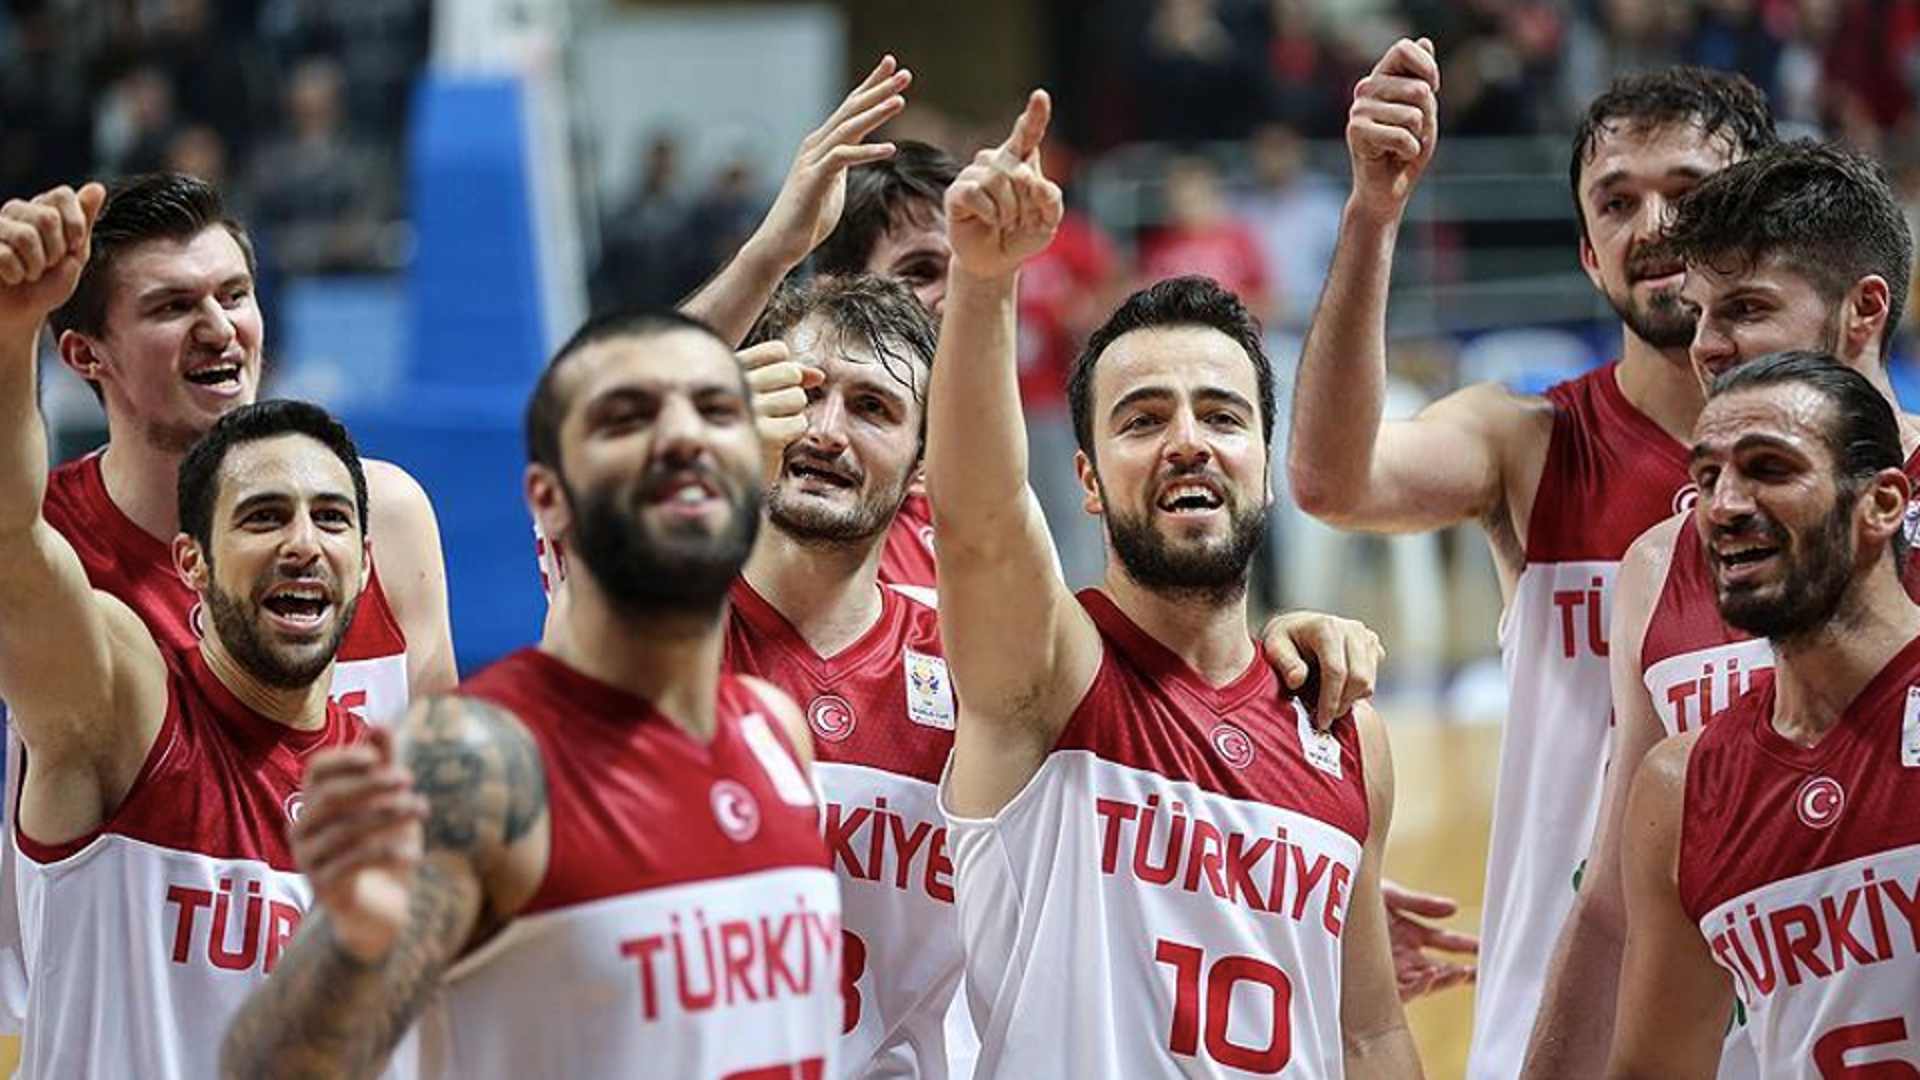 The EuroBasket 2022 Round of 16 match between Turkey vs France will be held at Arena Berlin on September 10 at 12:00 PM (International time), and September 10, 3:30 PM (Indian time).